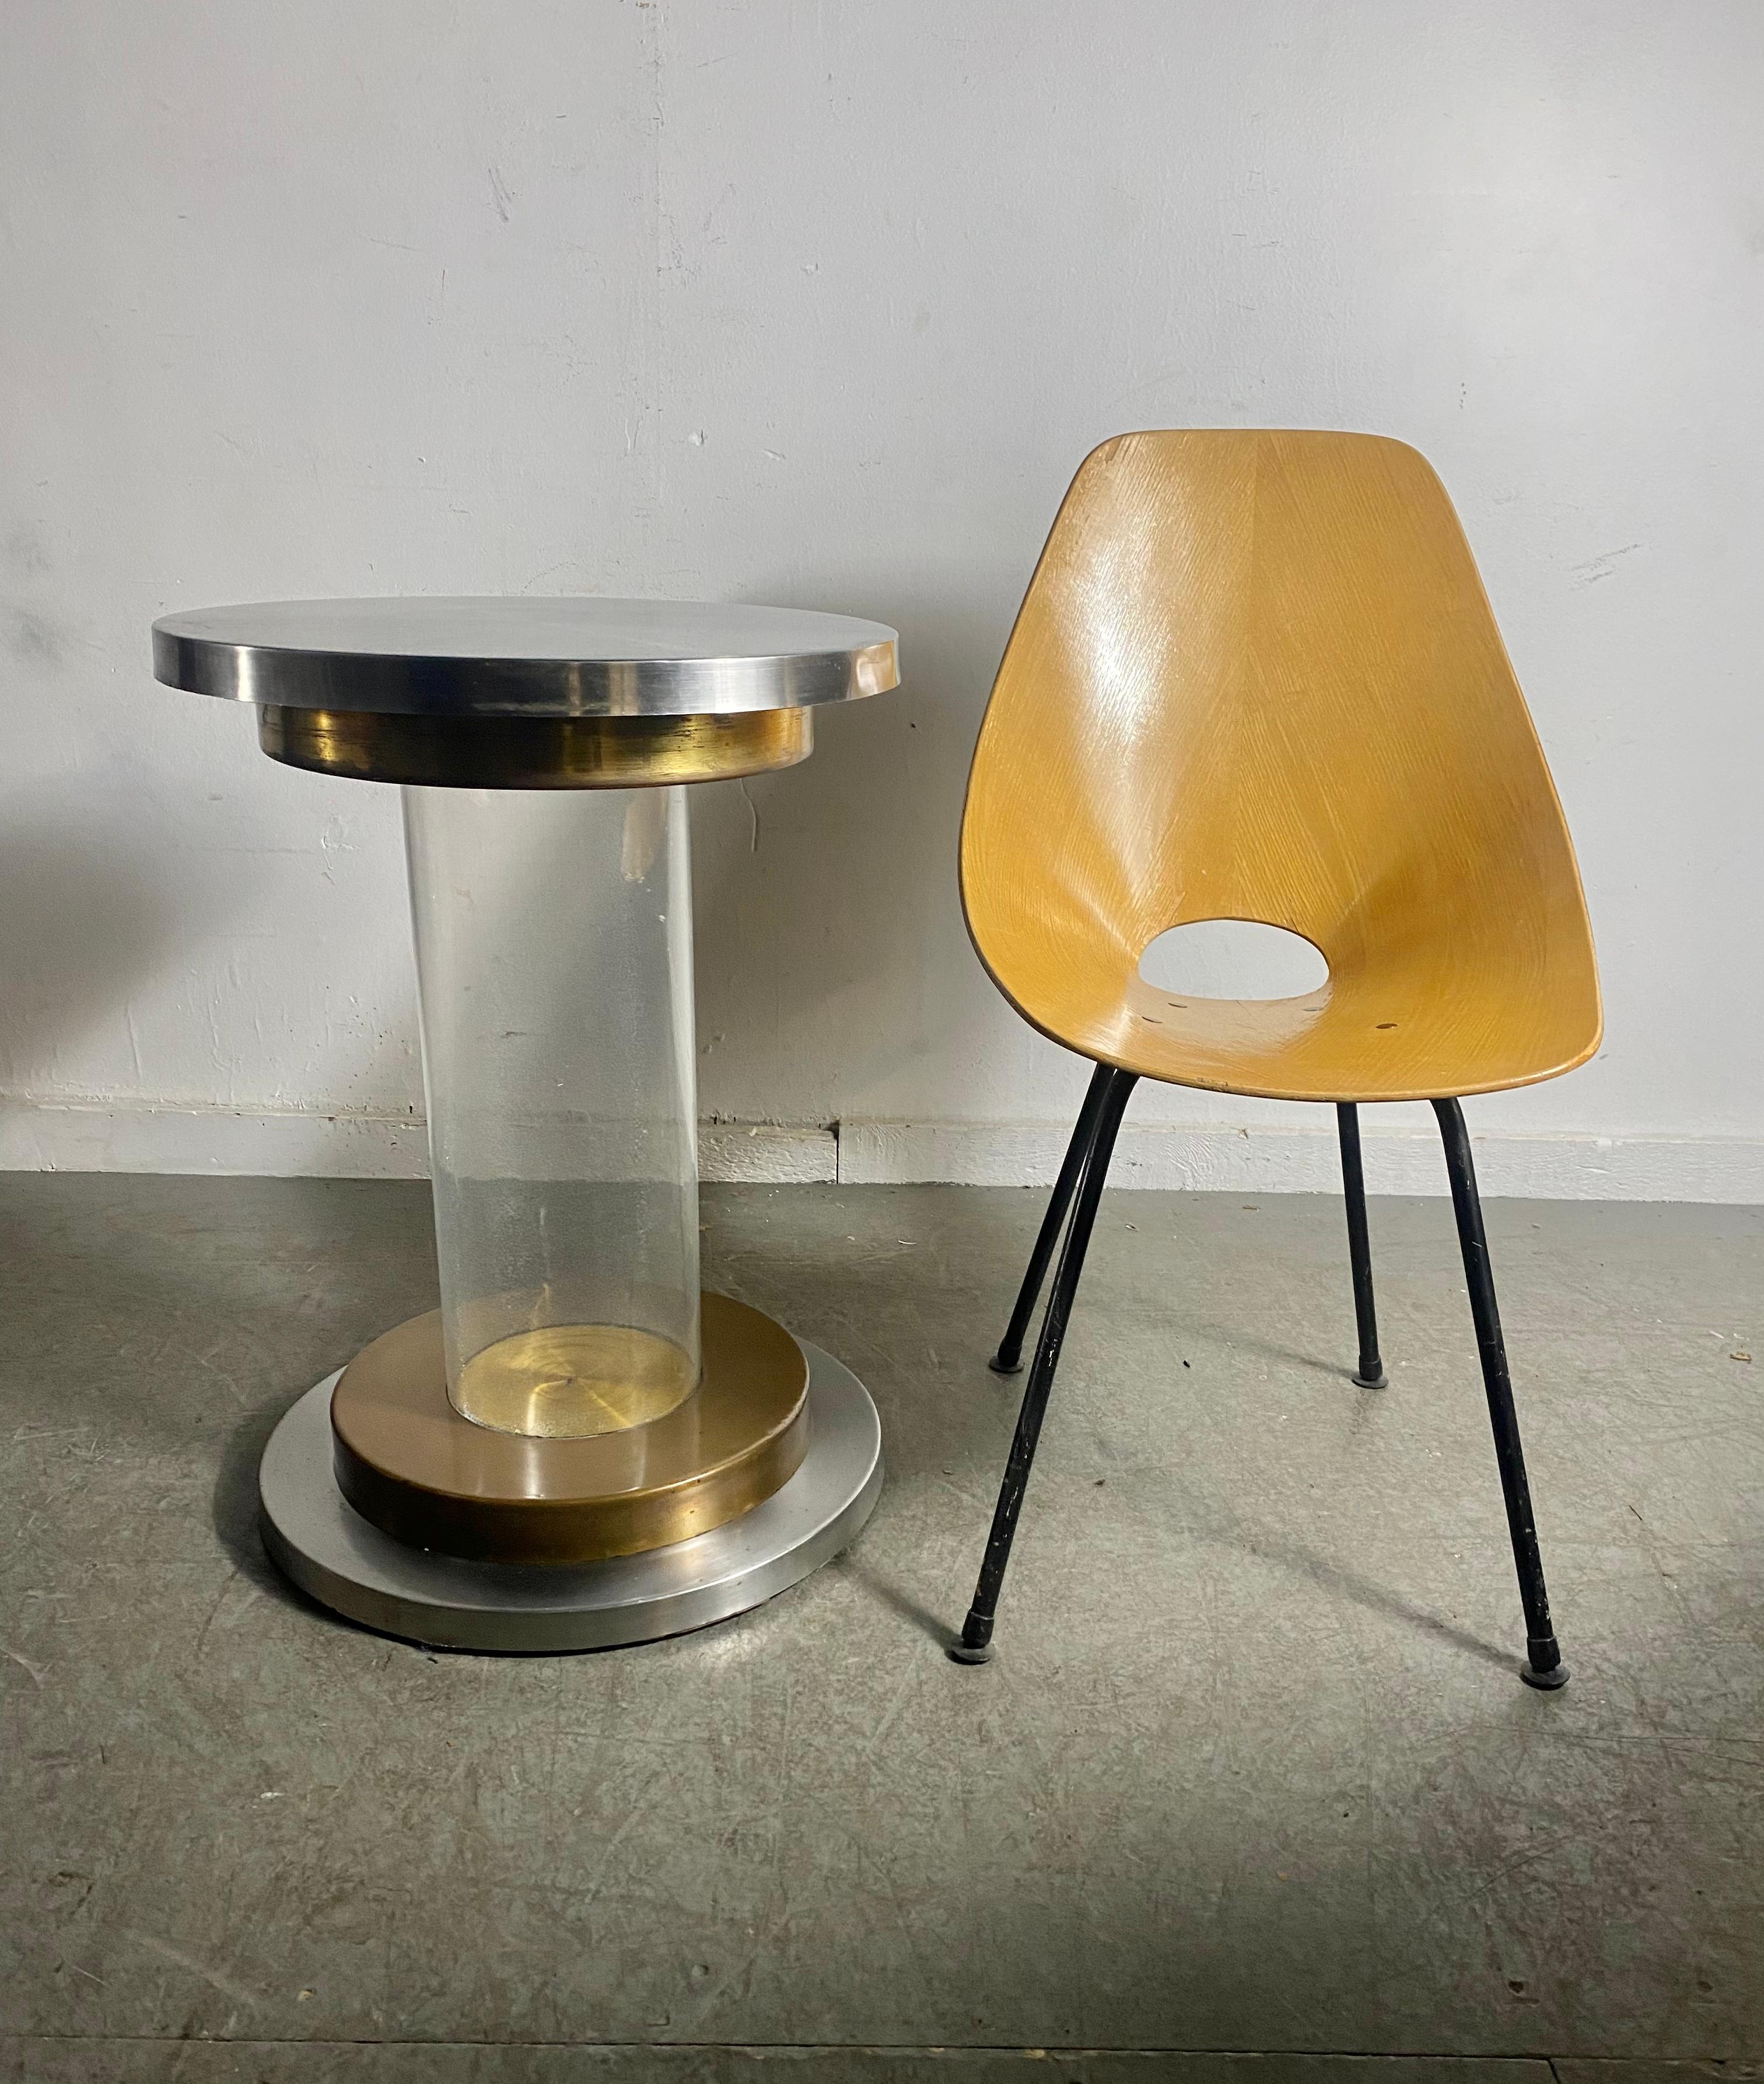 Italian lucite, brass and aluminum pedestal table base, ( ONLY) circa 1970s.
Created by artist Romeo Rega. Base diameter measures 19